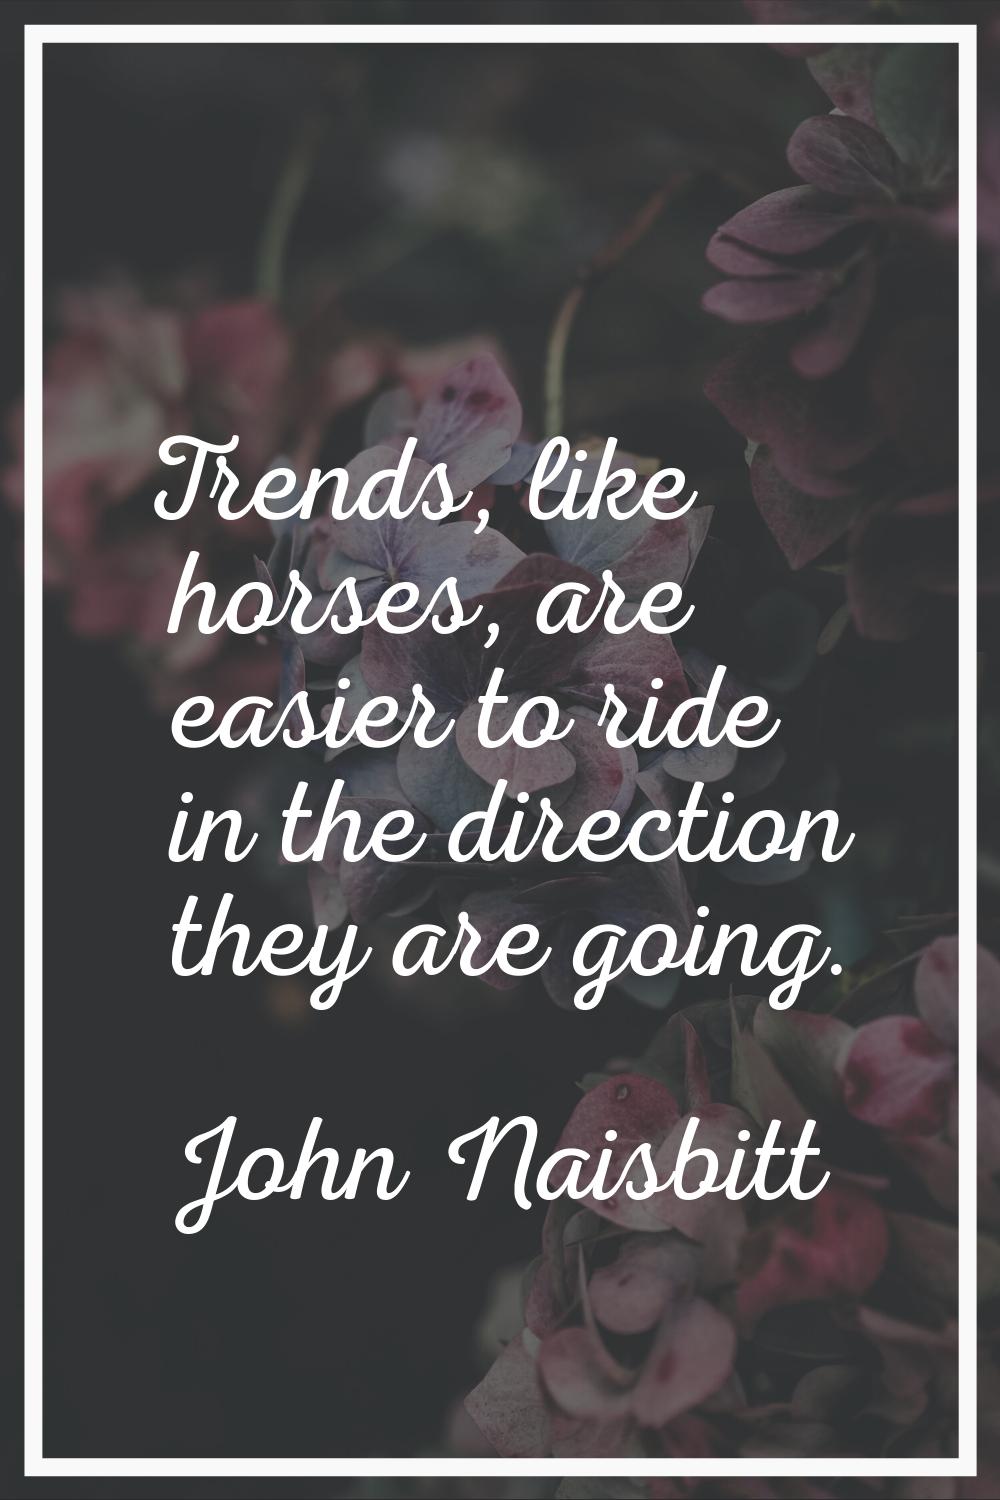 Trends, like horses, are easier to ride in the direction they are going.